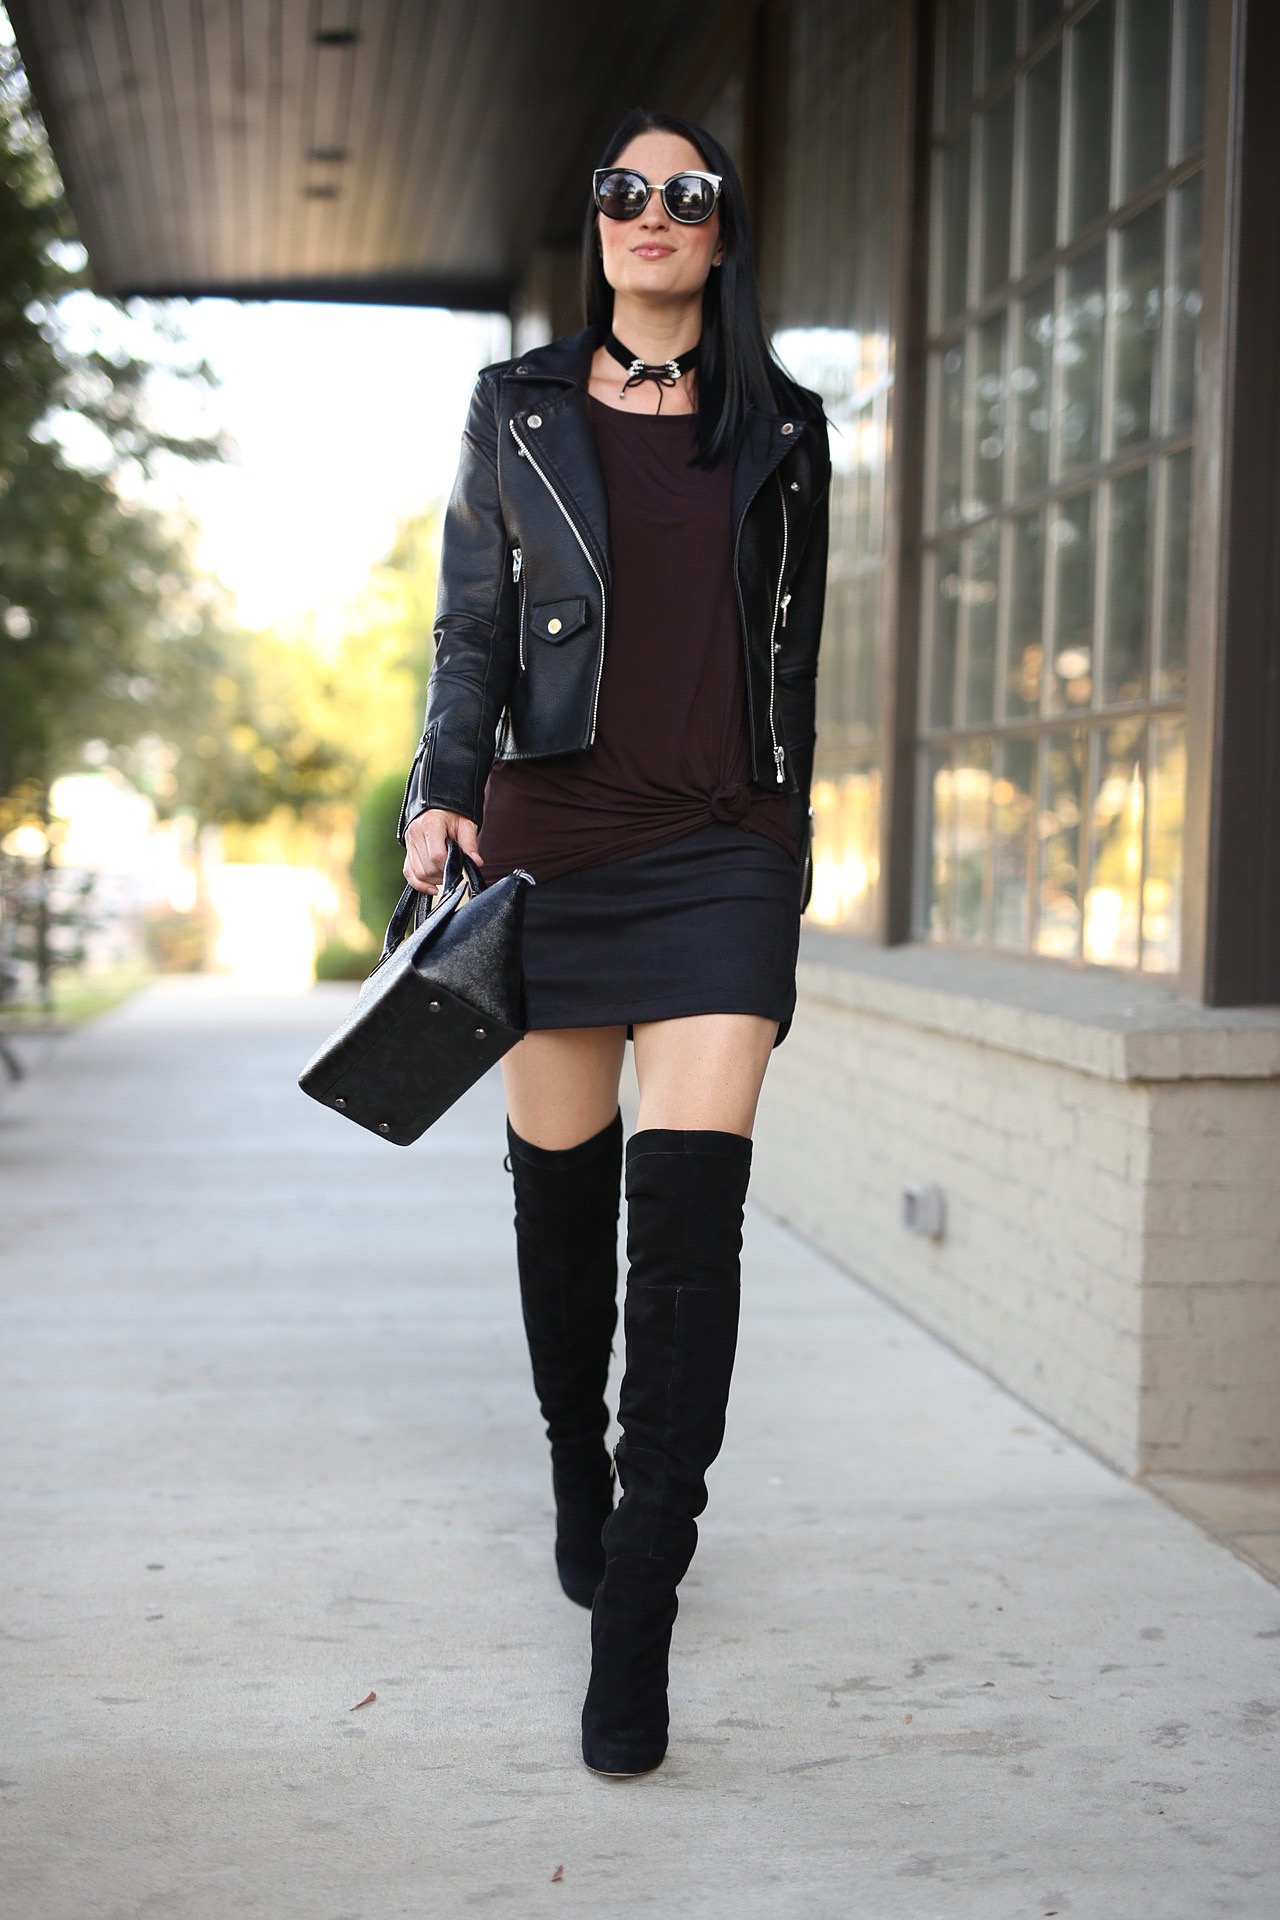 Black Leather Jacket, black mini skirt, black OTK boots | how to style a black mini skirt | how to style black OTK boots | how to style a leather jacket | all black style | fall fashion tips | fall outfit ideas | fall style tips | what to wear for fall | cool weather fashion | fashion for fall | style tips for fall | outfit ideas for fall || Dressed to Kill #blackminiskirt #leatherjacket #otkboots 